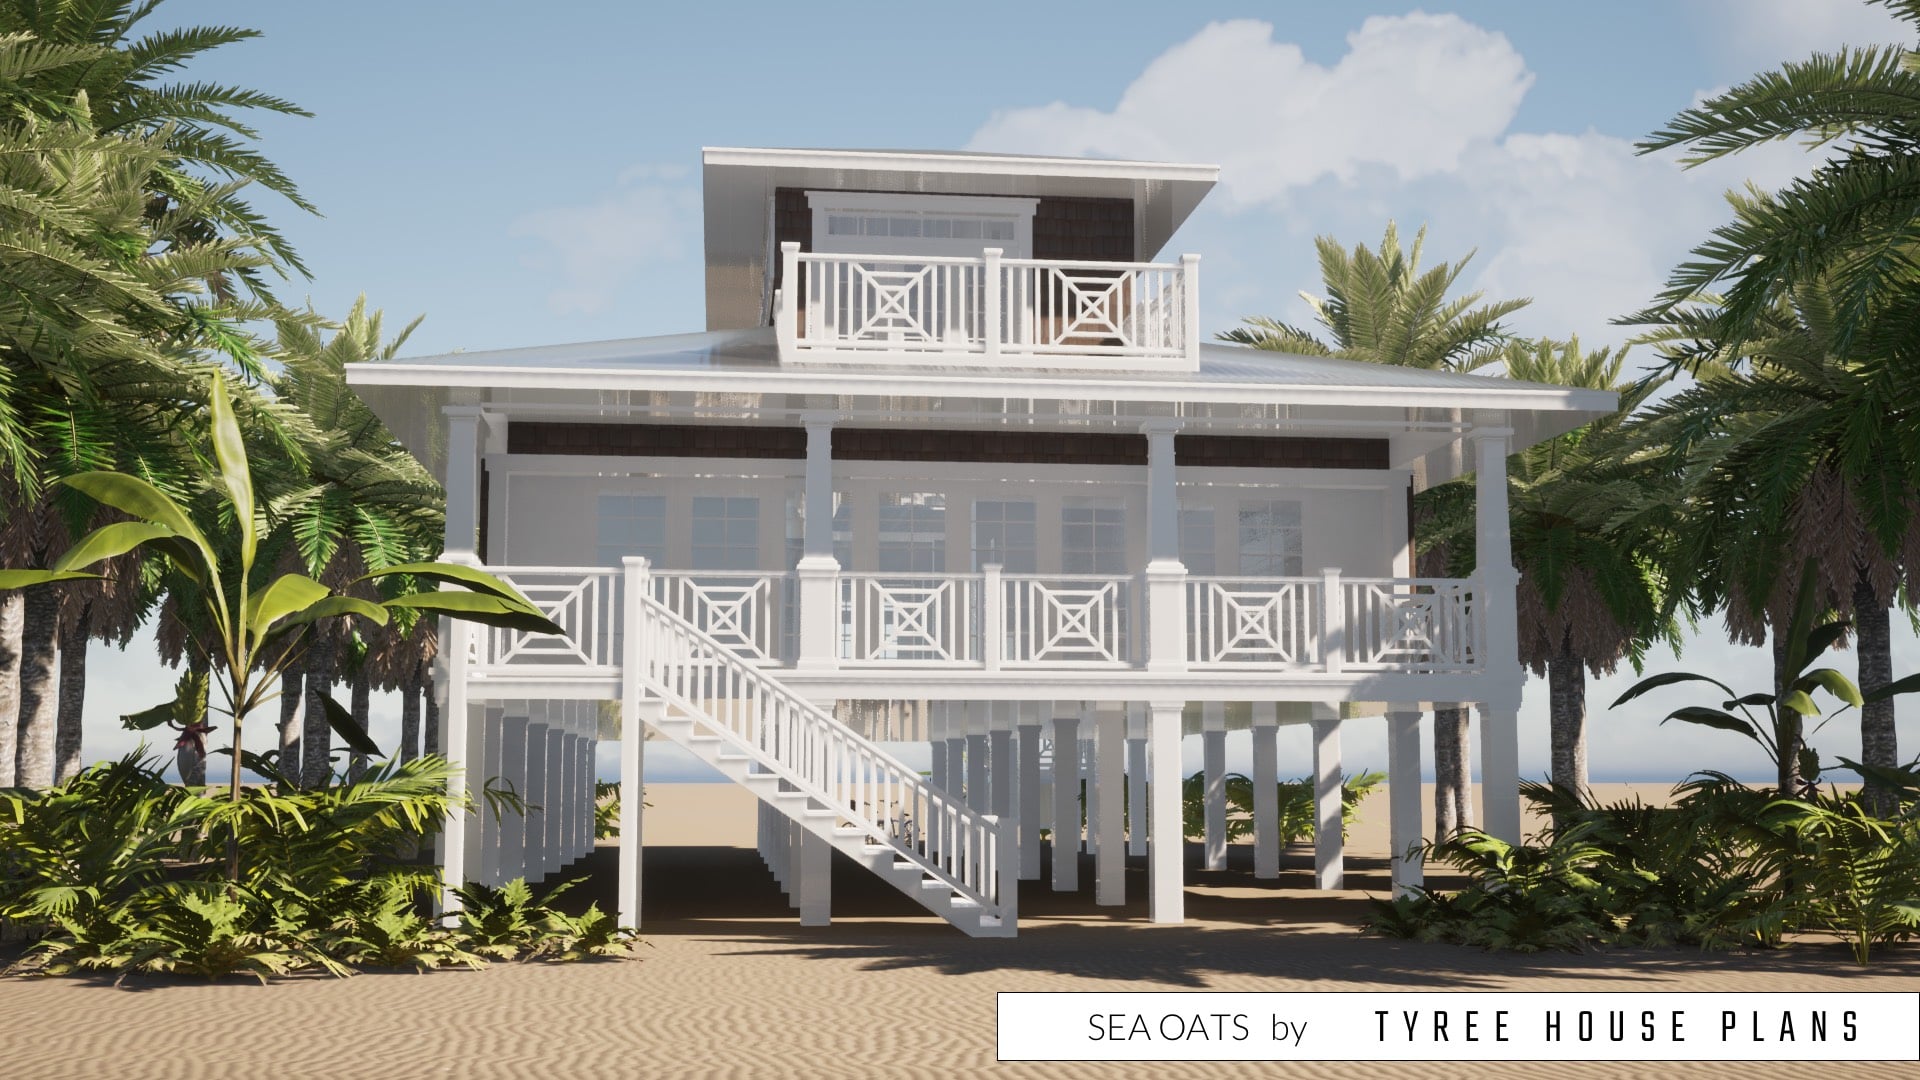 Sea Oats House Plan by Tyree House Plans